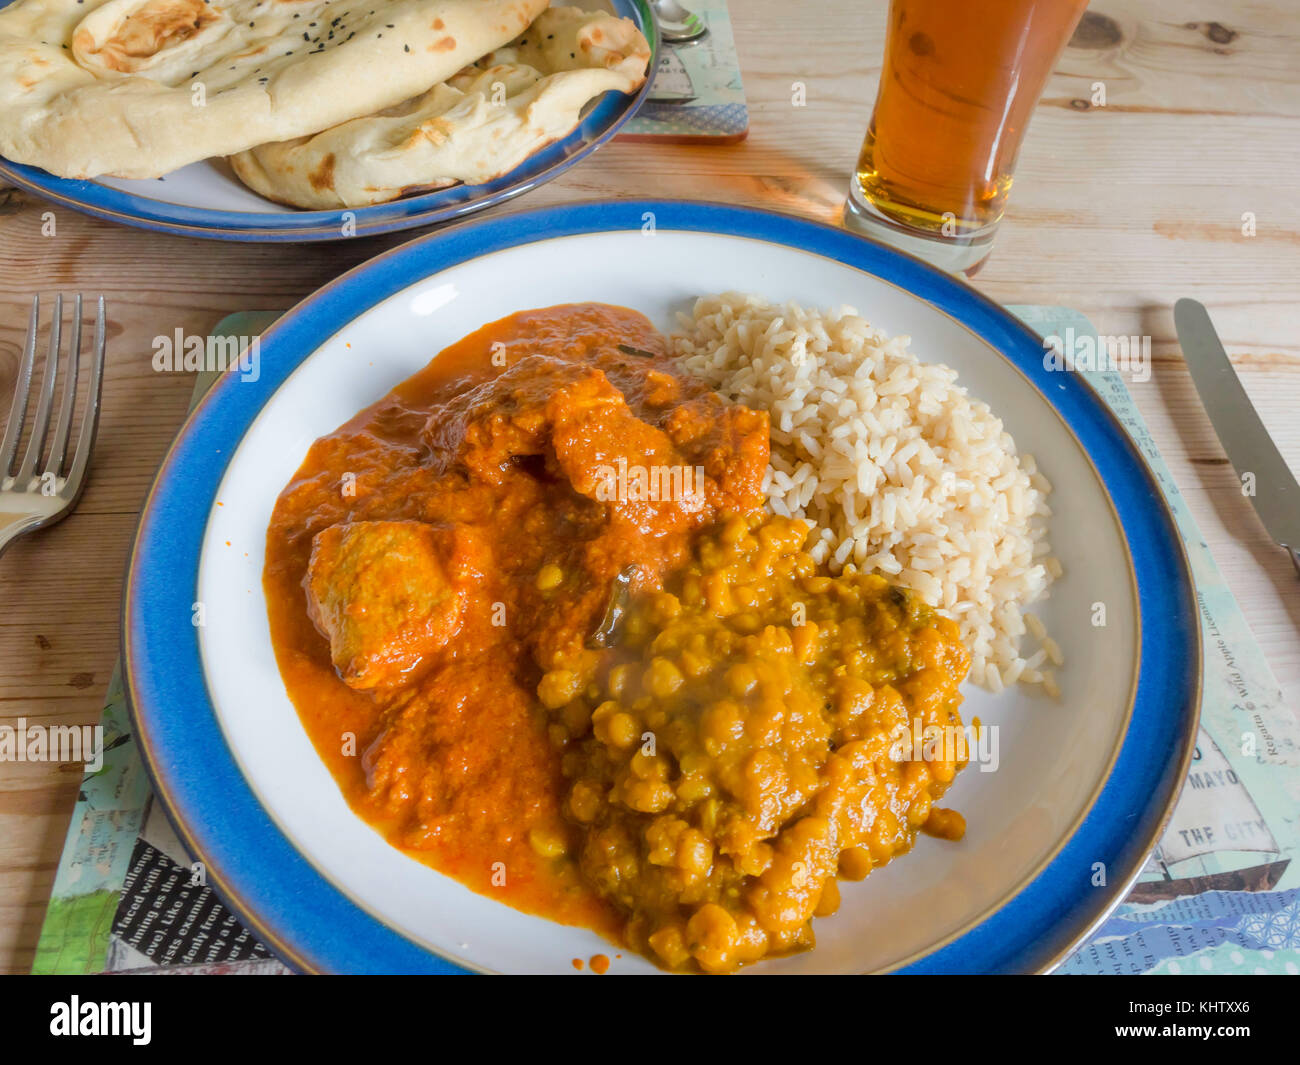 Indian Take-away food served at home Chicken Madras Curry, Tarka Dahl, Tandoori Naan Bread, Basmati Brown Rice, Mango and Lime Chutney.s and a glass o Stock Photo